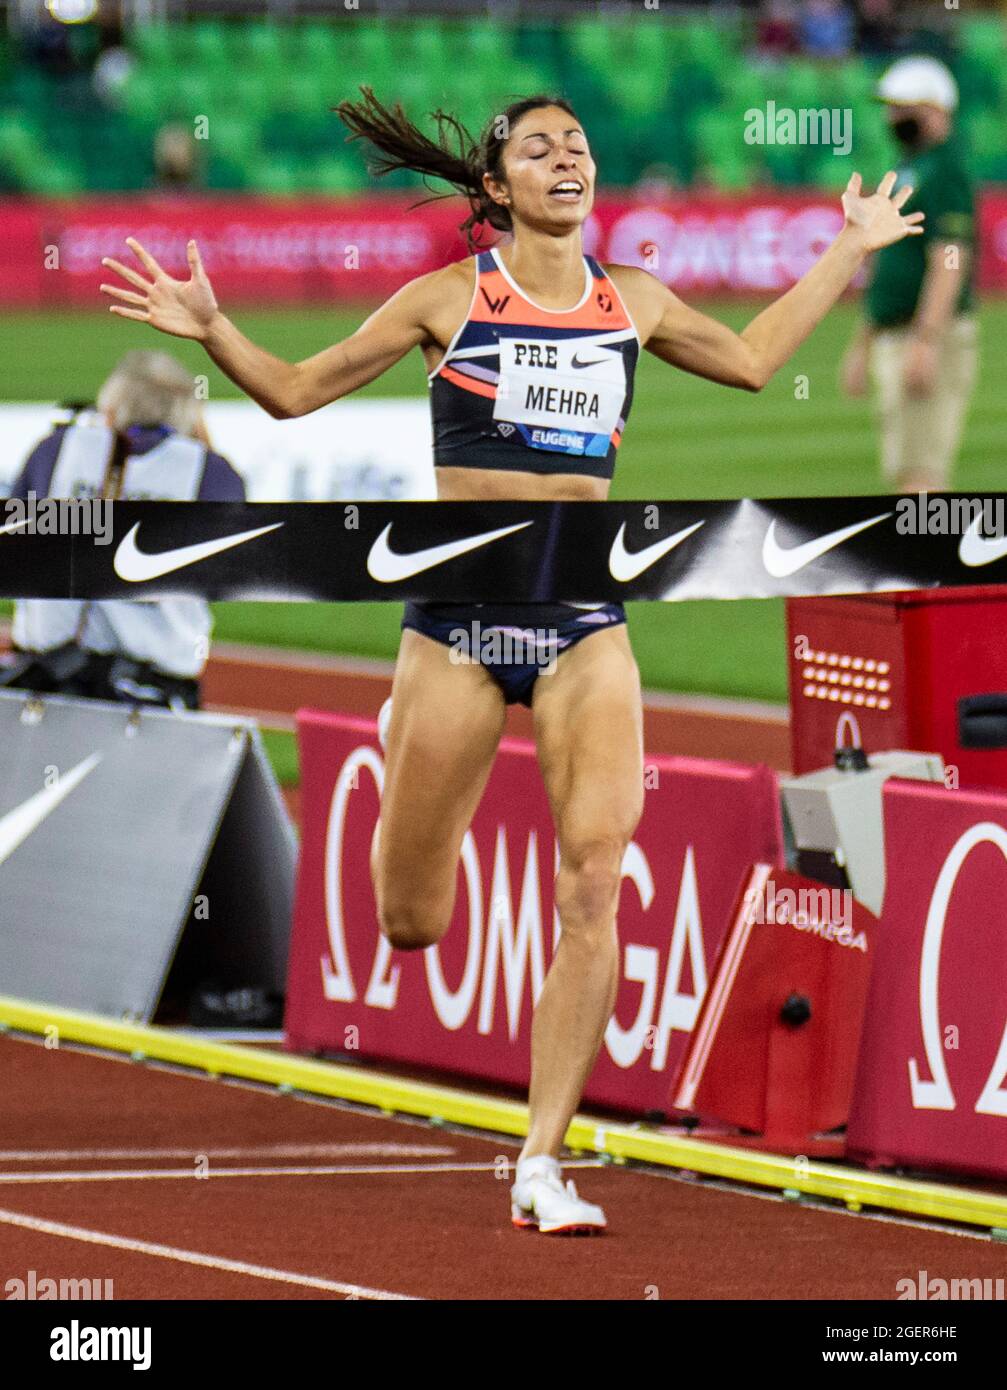 Eugene, USA. 20th Aug, 2021. August 20, 2021 Eugene OR USA: Rebecca Mehra wins the womens 1500 meters during the Nike Prefontaine Classic night session at Hayward Field Eugene, OR Thurman James/CSM Credit: Cal Sport Media/Alamy Live News Stock Photo